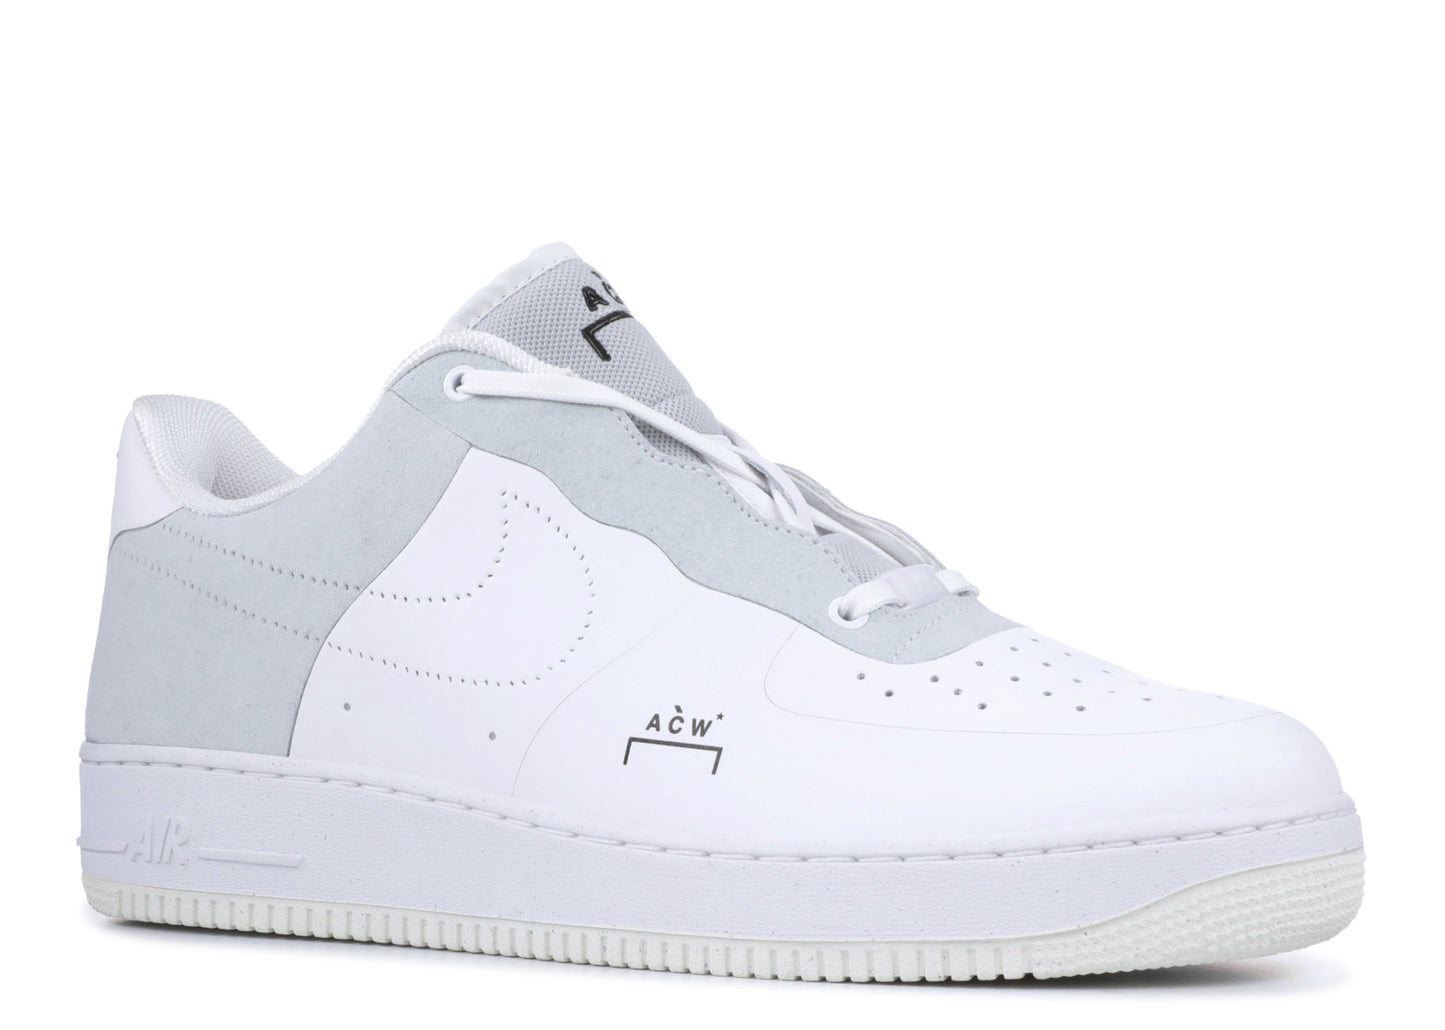 A-Cold-Wall x Nike Air Force 1 Low "White"